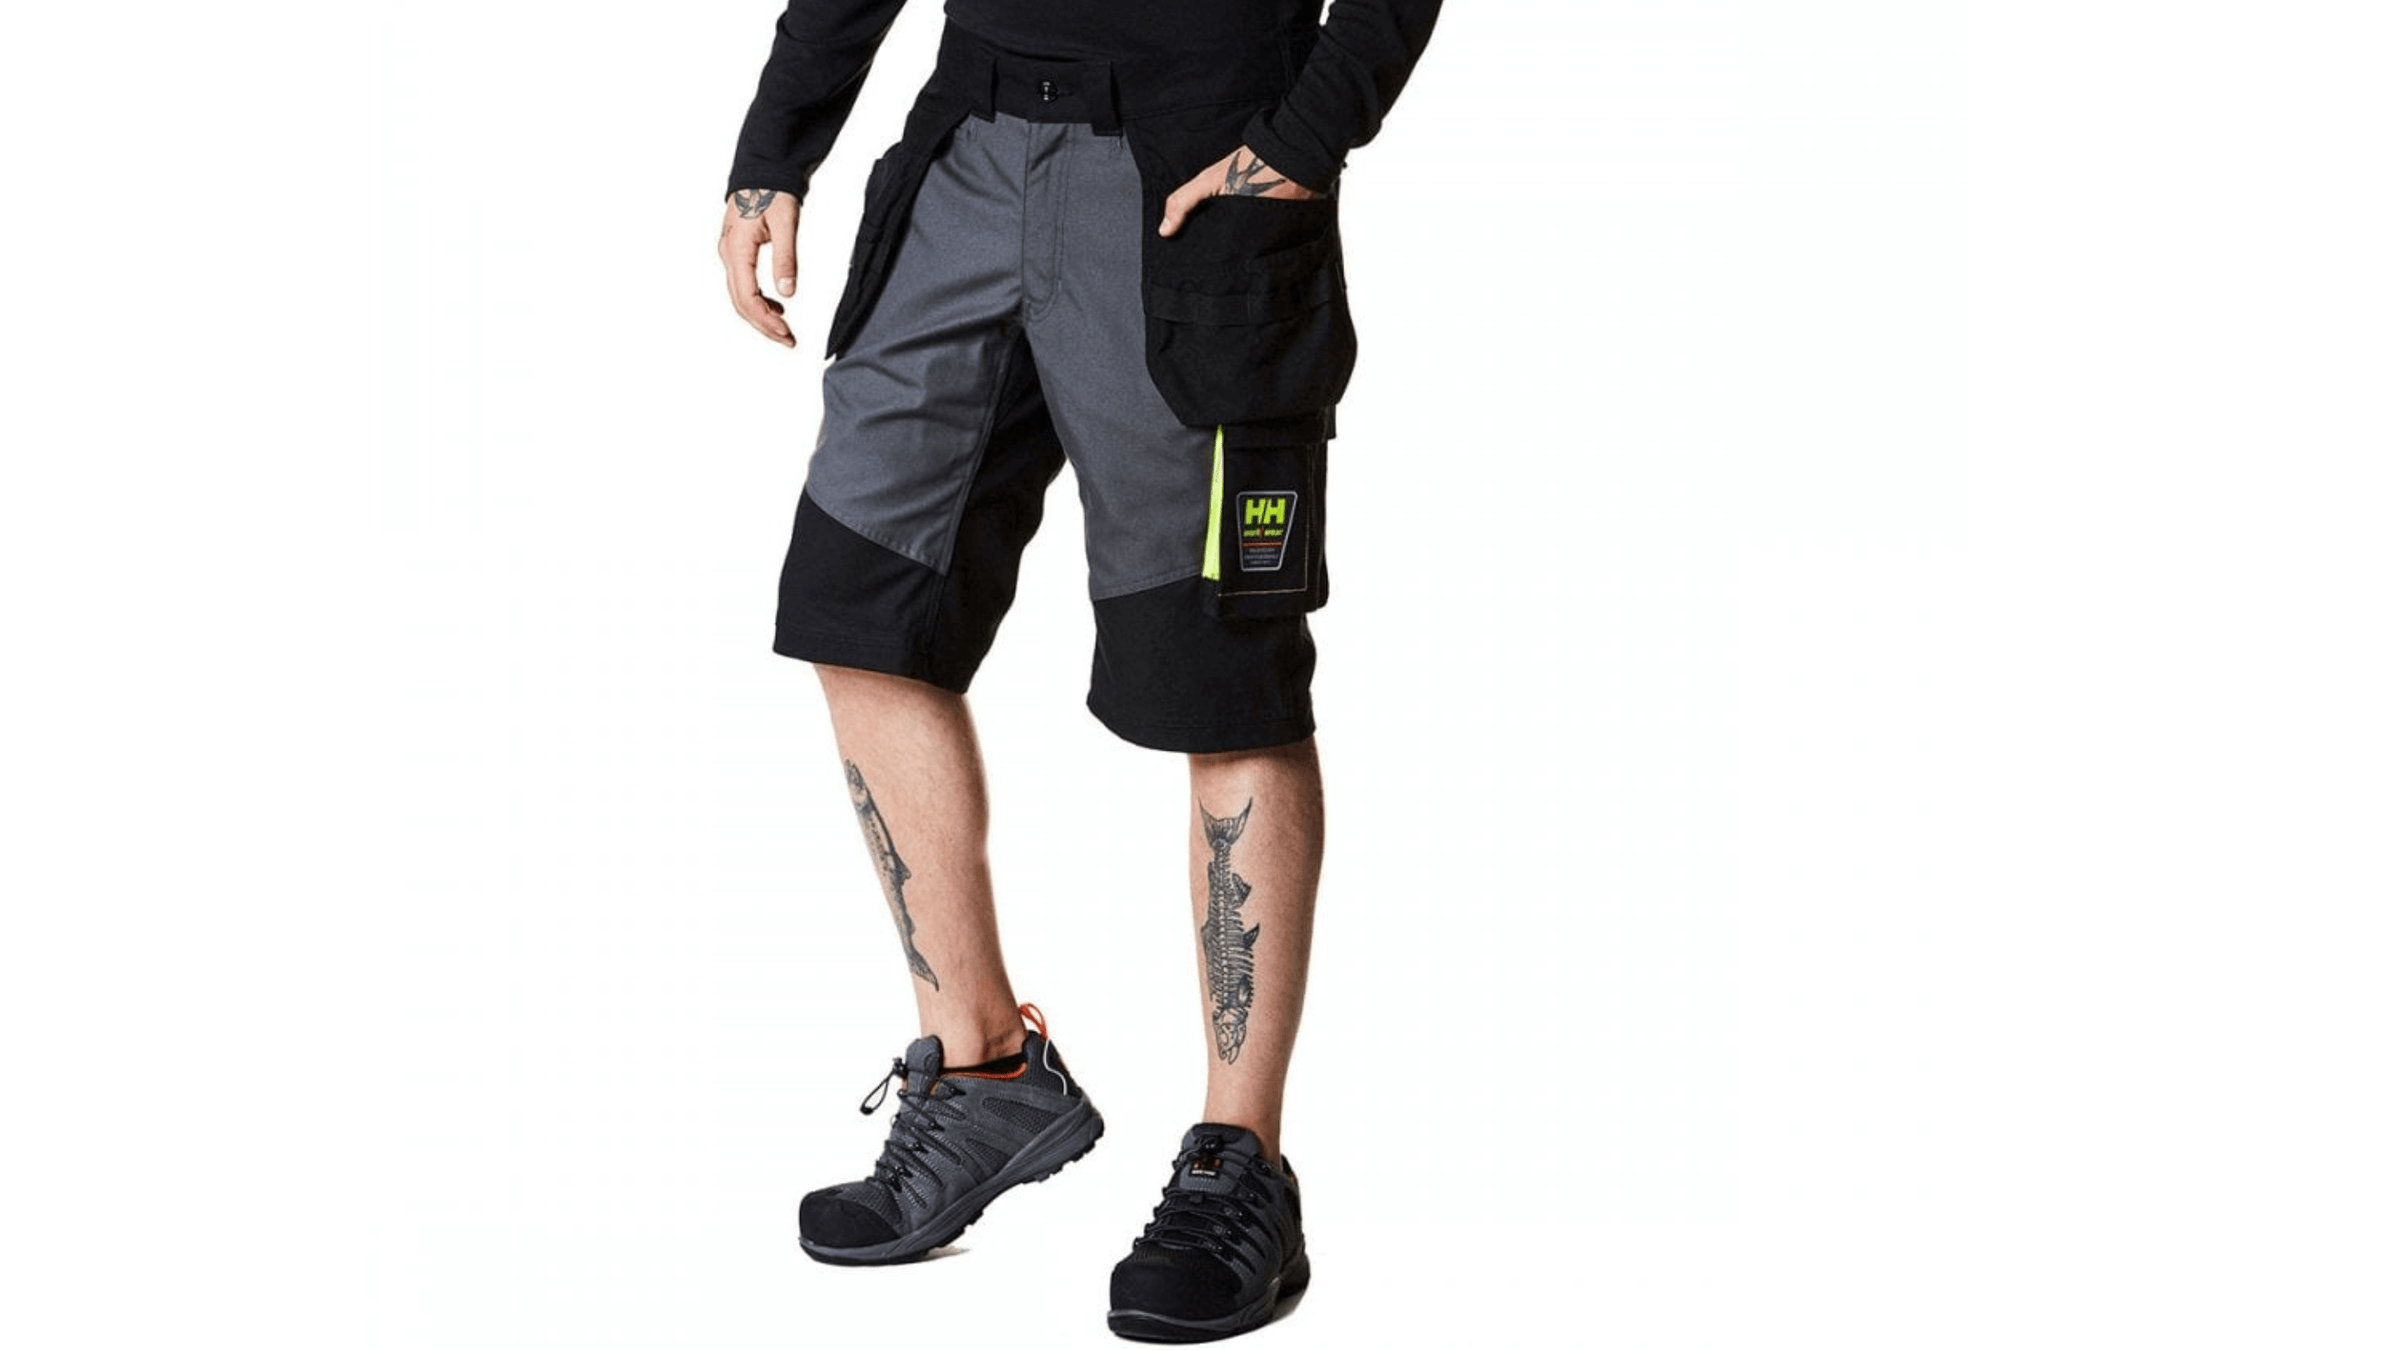 An image of someone wearing Helly Hansen Shorts